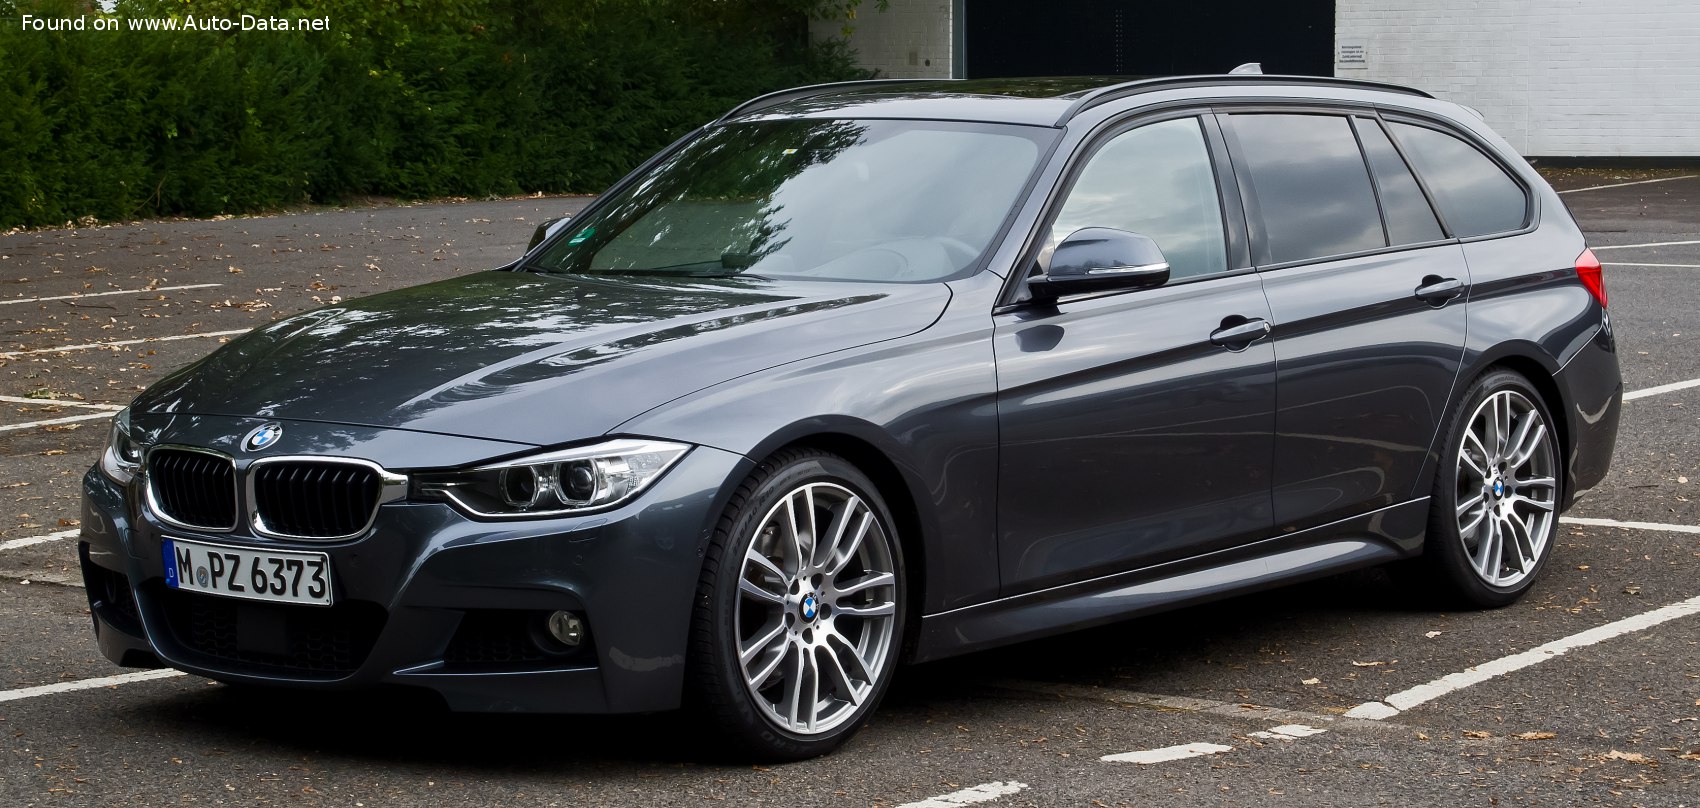 BMW 320d F31 215HP ACCELERATION TOP SPEED & SOUND by AutoTopNL